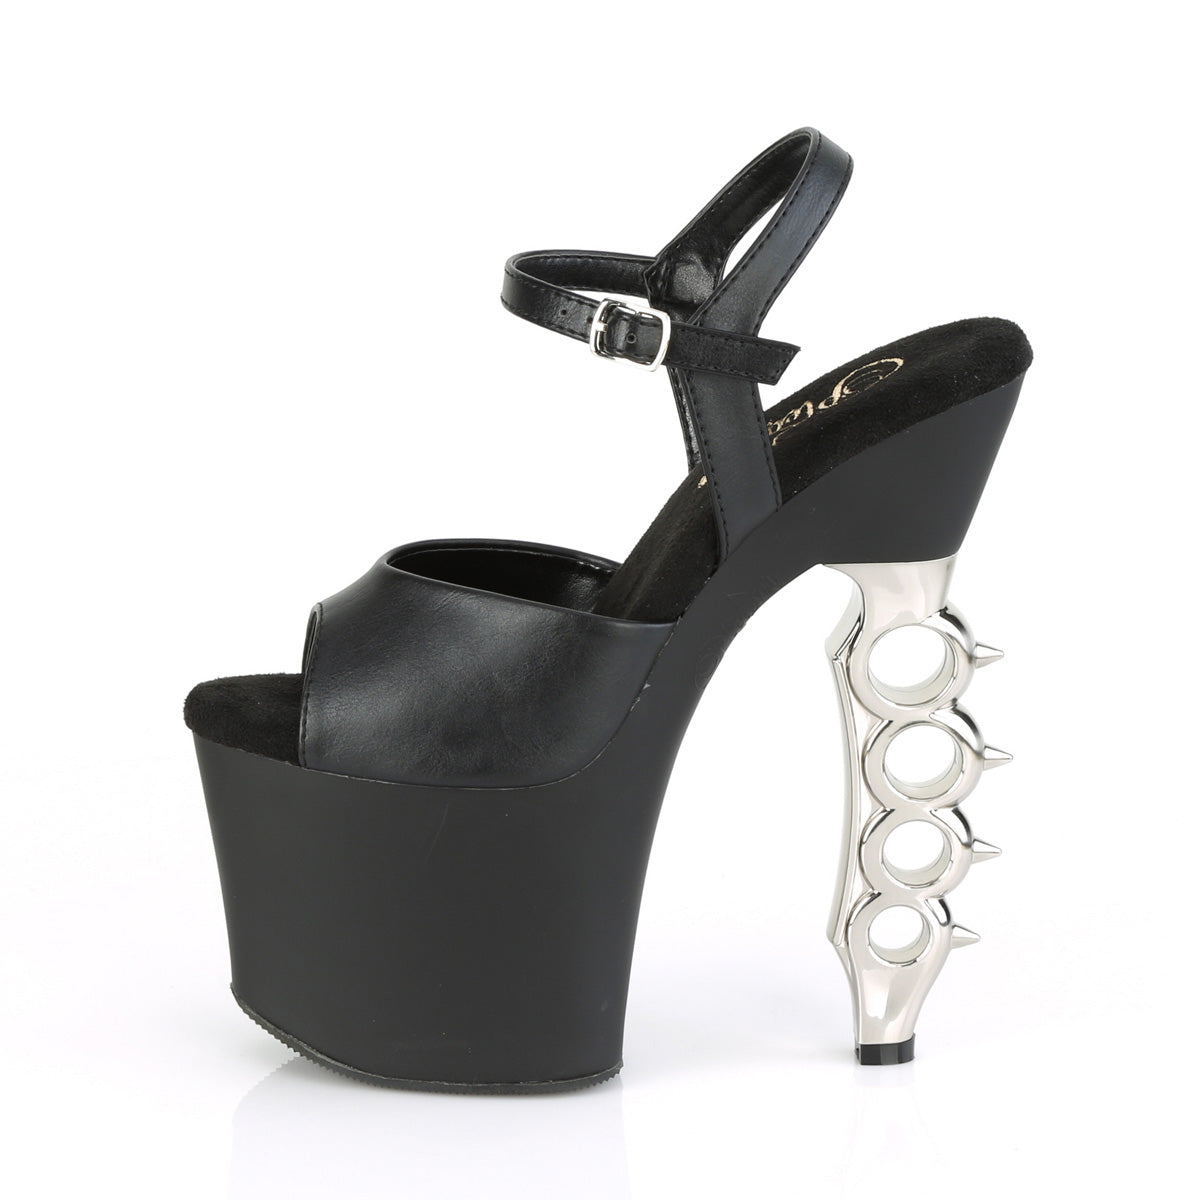 IRONGRIP-709 Pleaser Pole Dancing Shoes 7 Inch Heel Pleasers - Sexy Shoes Pole Dance Heels